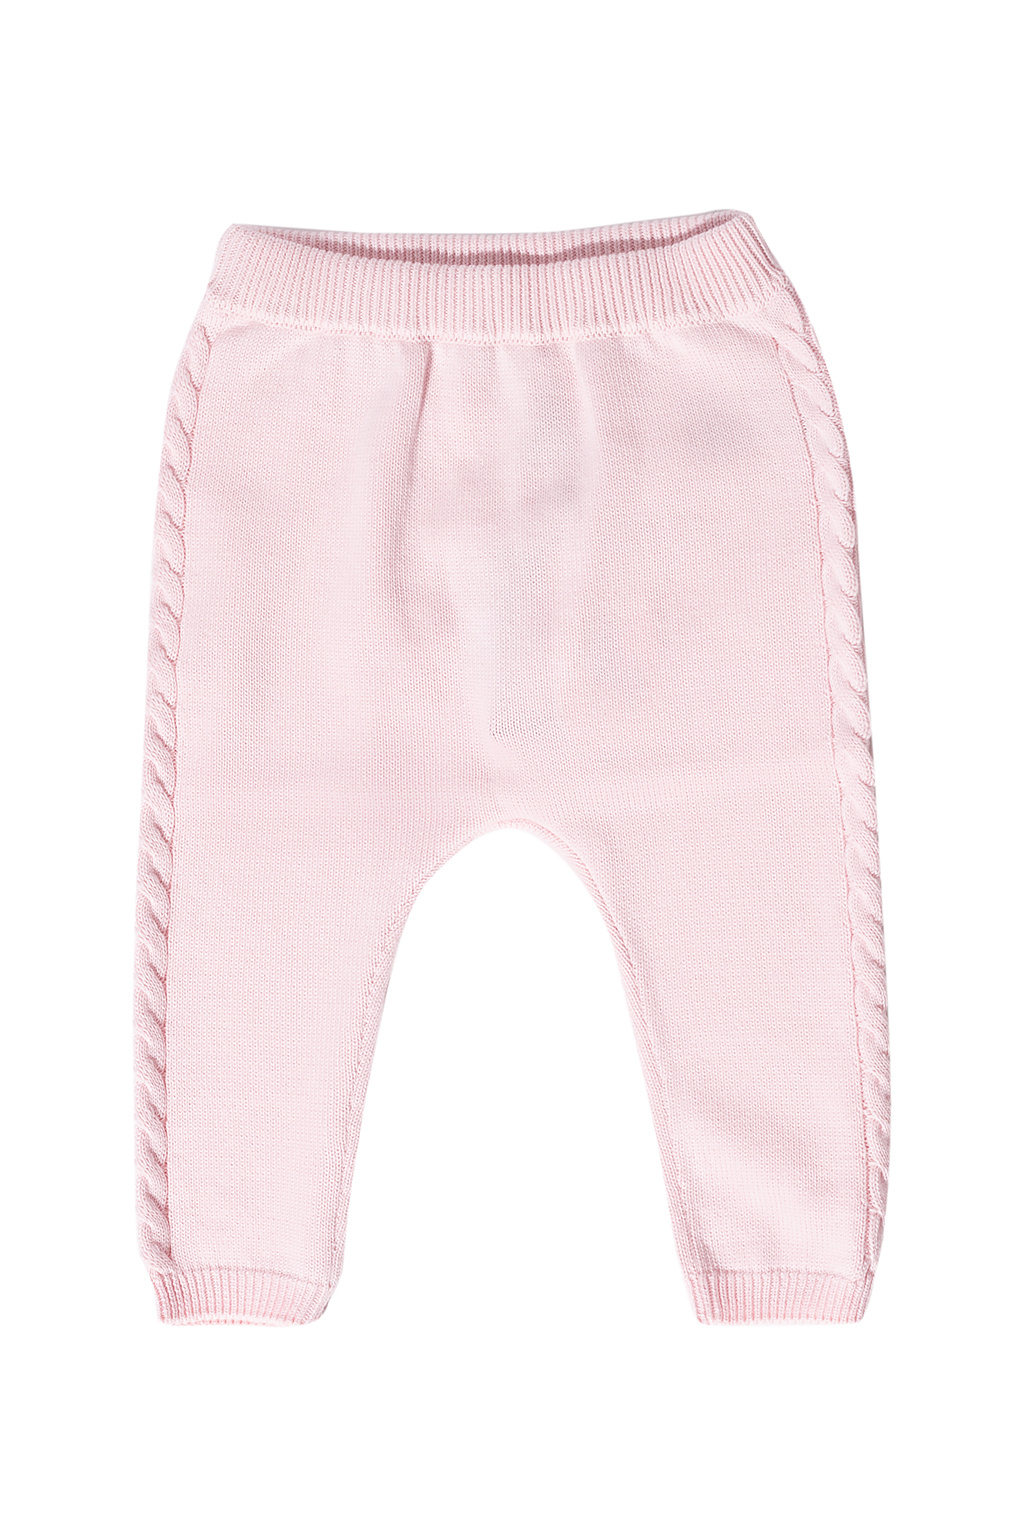 Fendi Kids Knitted trousers with logo